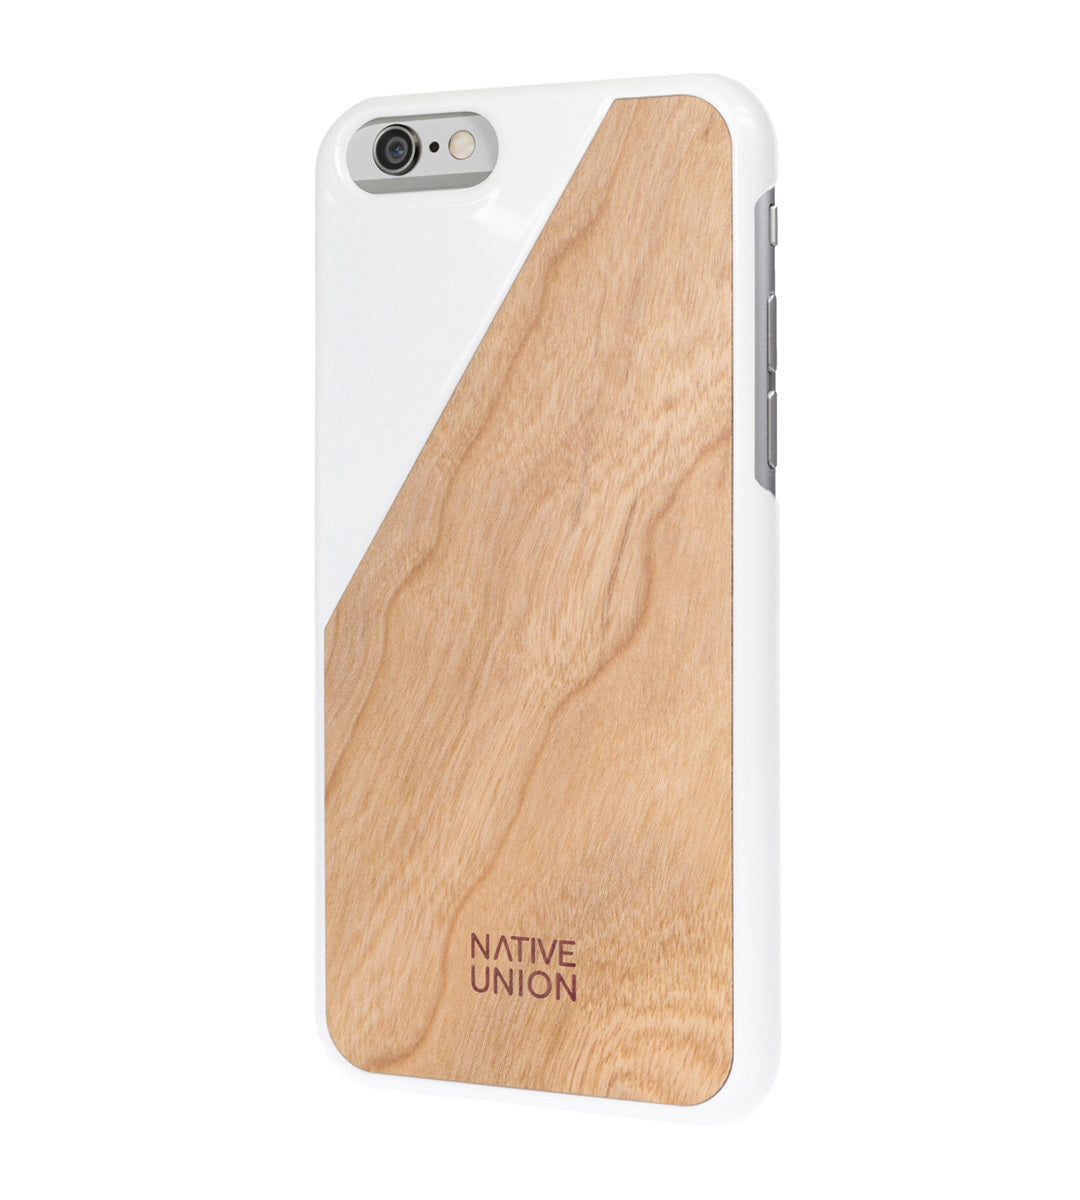 Native Union Clic Wooden for iPhone 6/6s/7 - White New